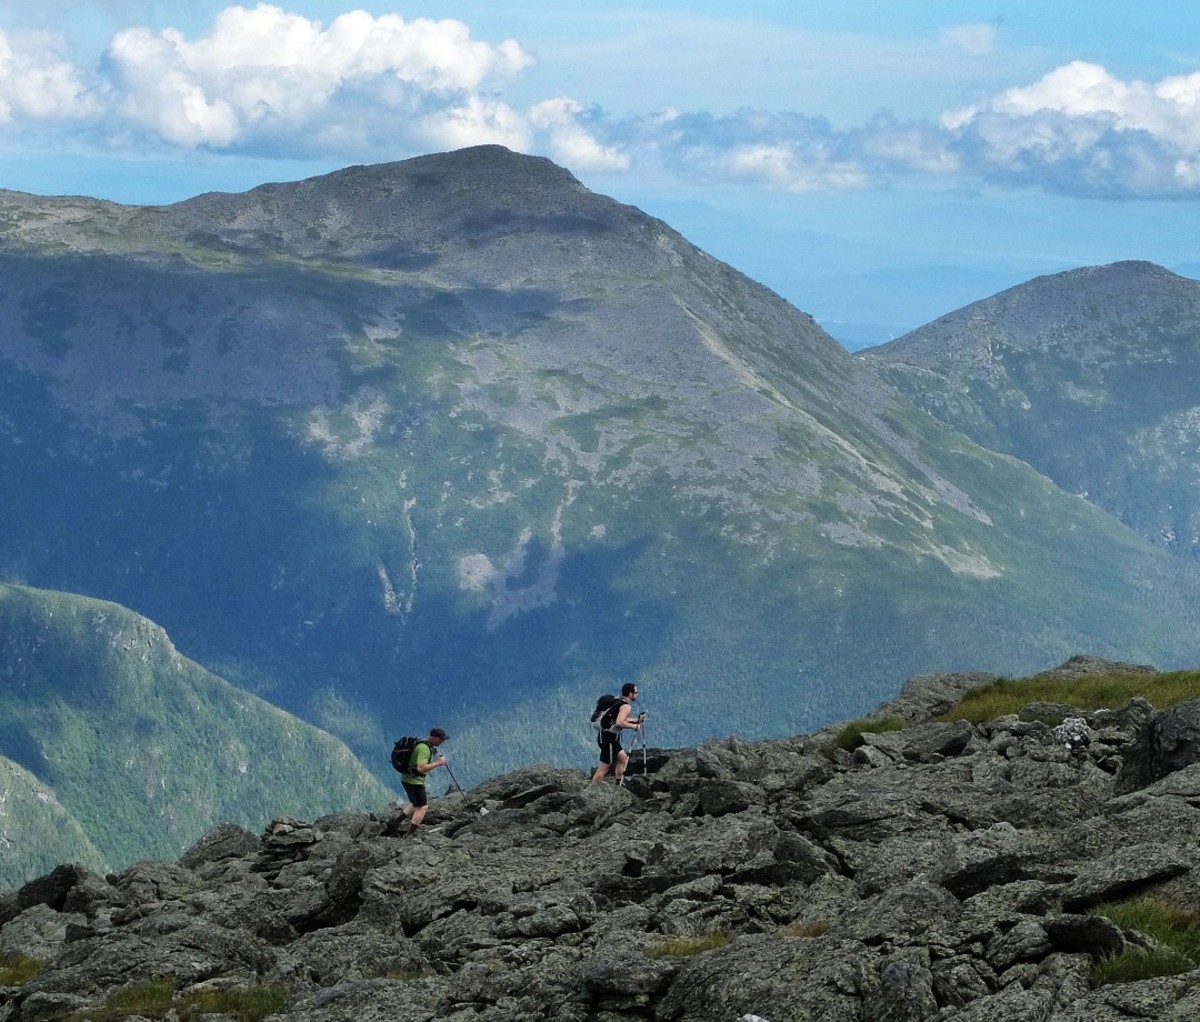 A pair of hikers traverse the trail New Hampshire's Presidential Range on Mount Washington, New Hampshire